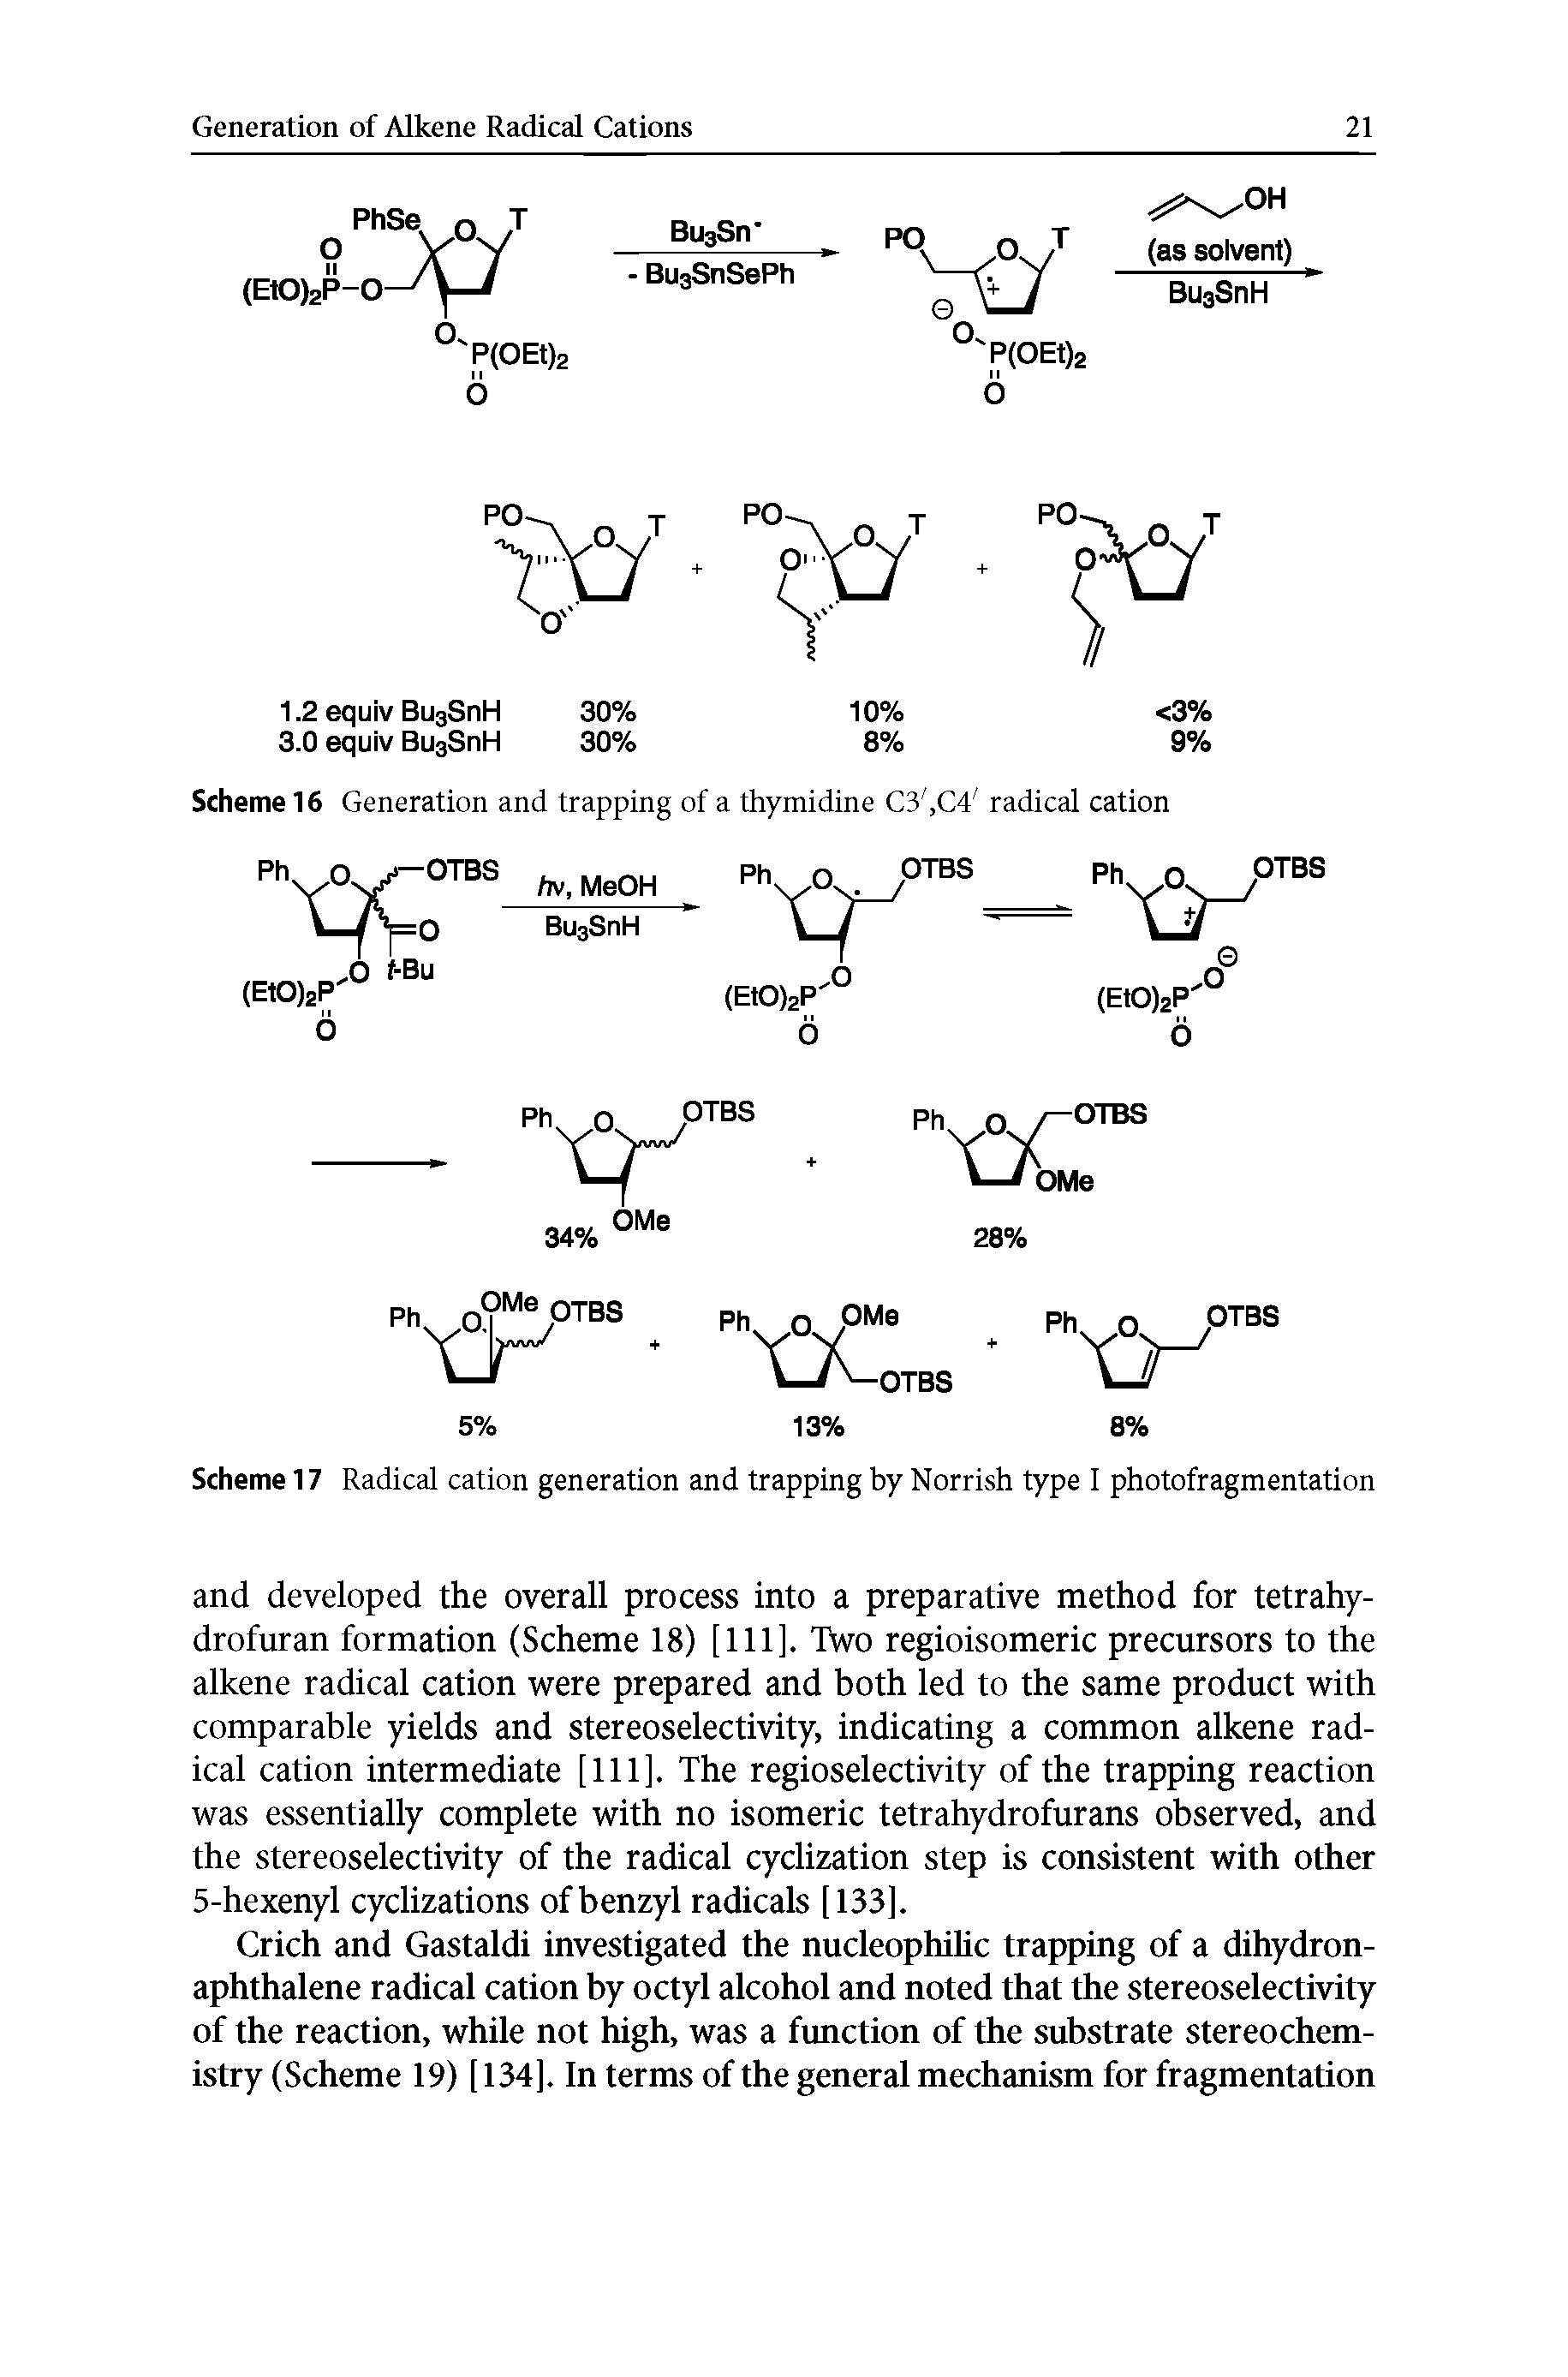 Scheme 17 Radical cation generation and trapping by Norrish type I photofragmentation...